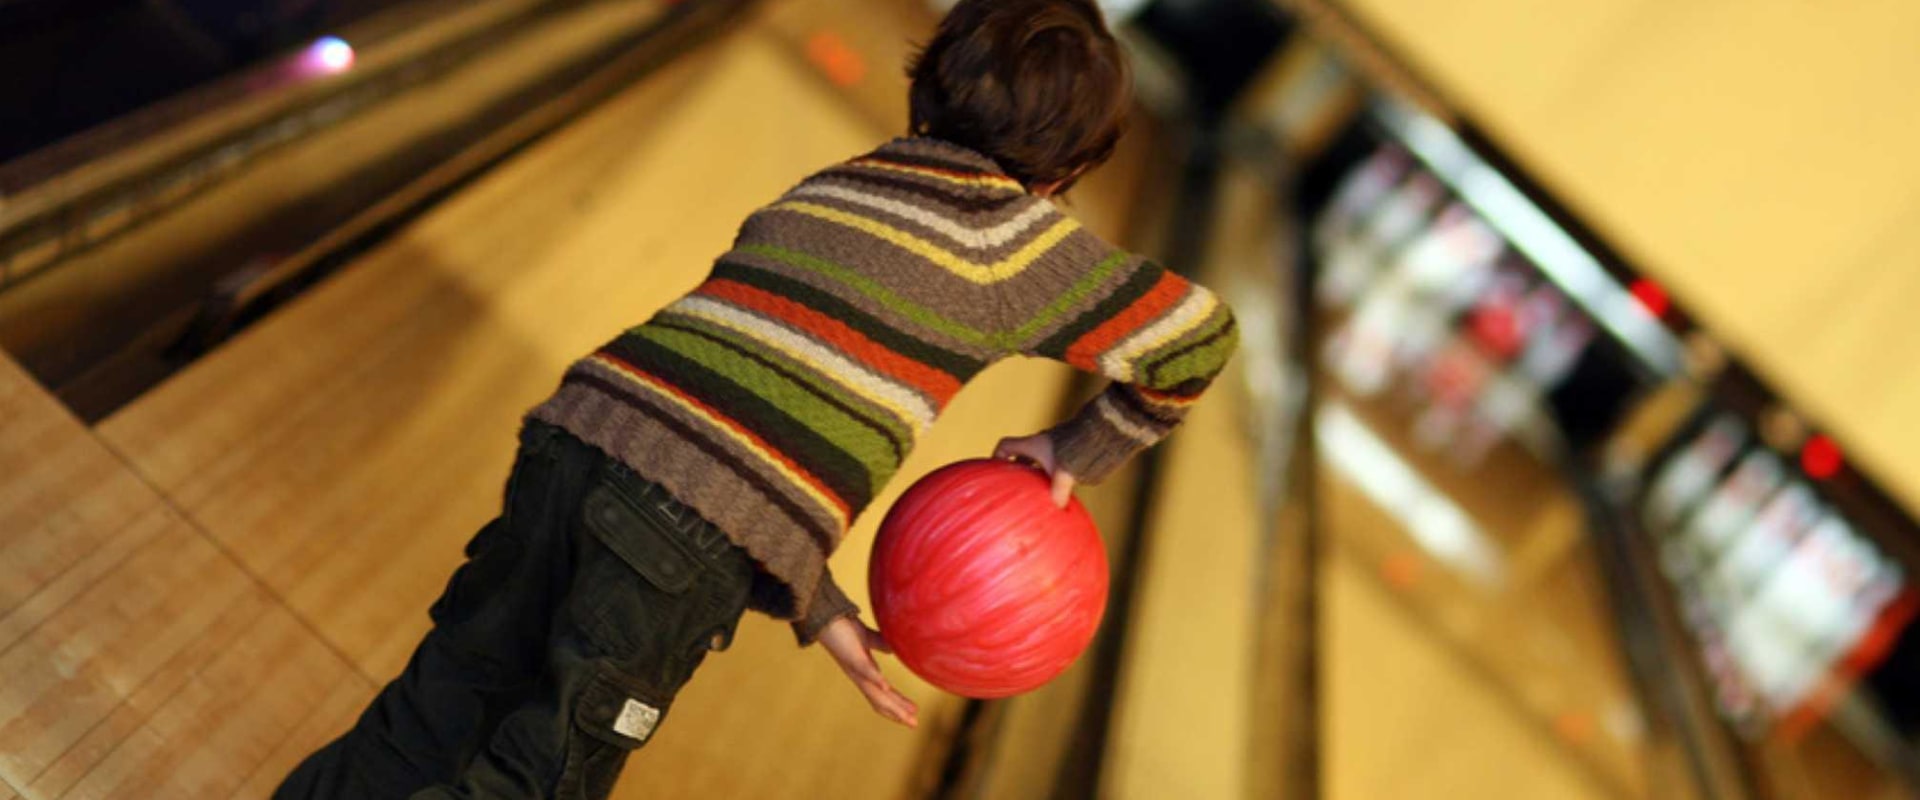 Unforgettable Birthday Parties at Herrill Lanes Bowling Alley in Suffolk County, NY